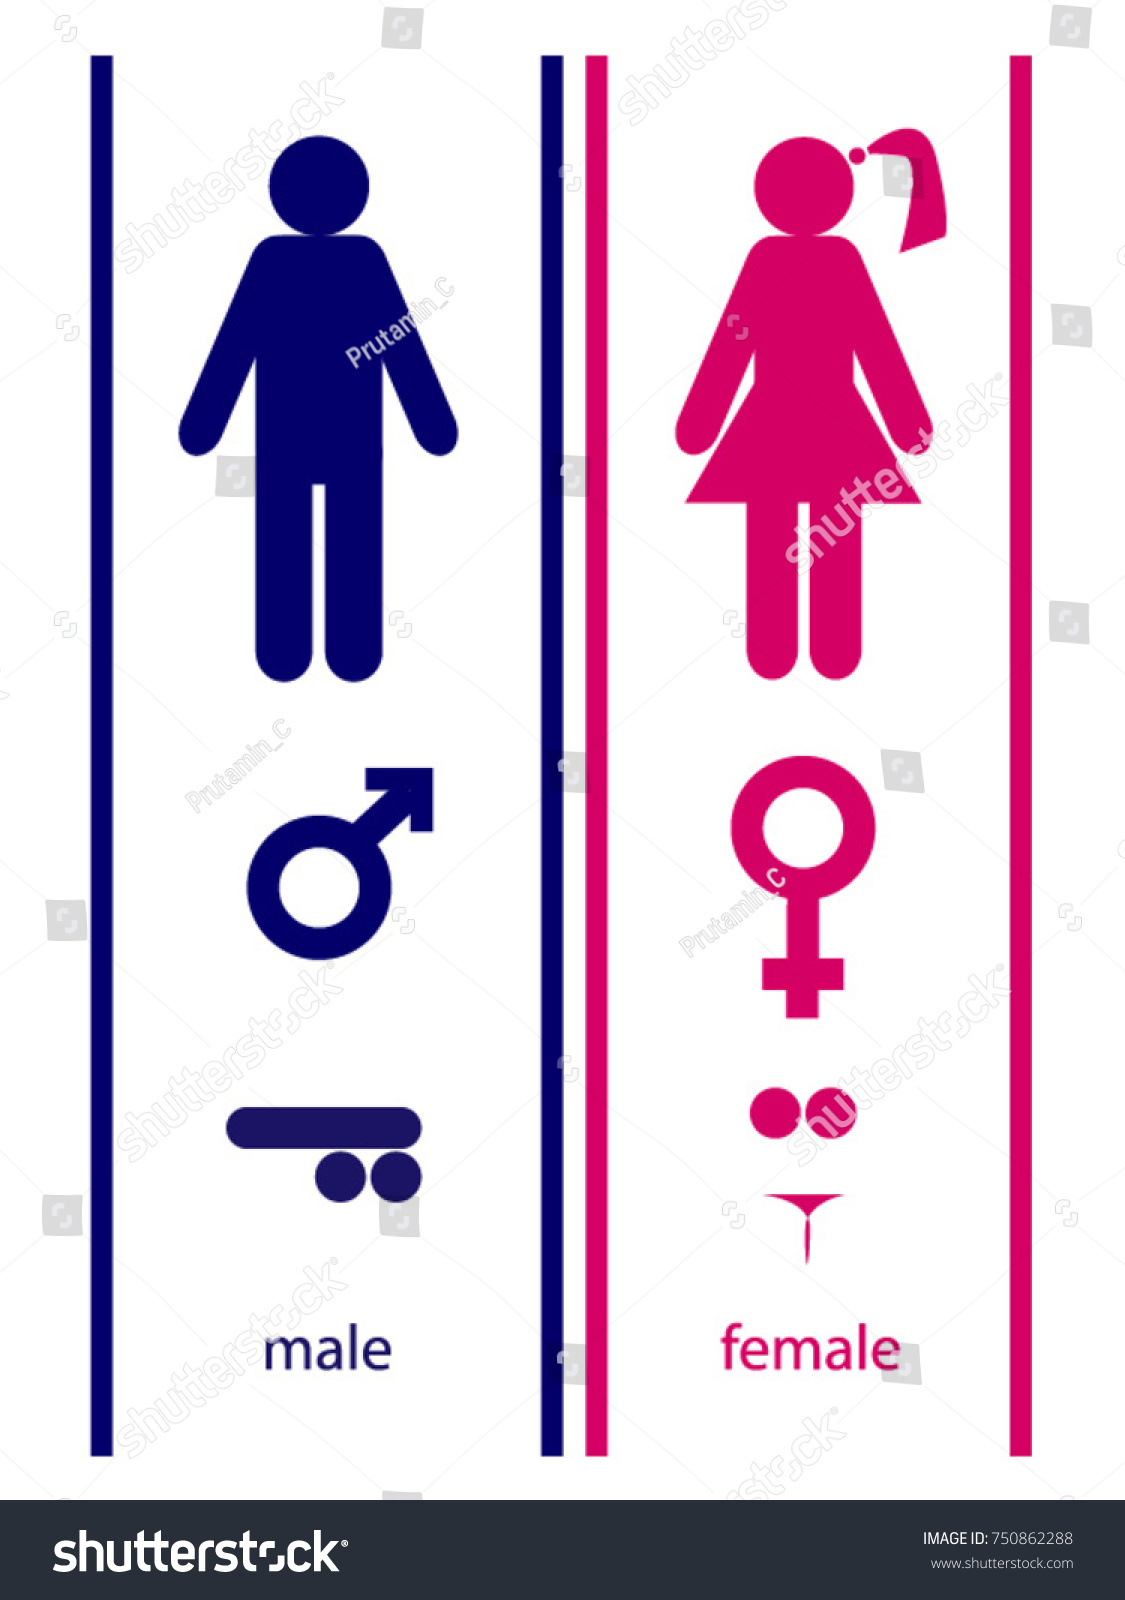 Male Female Gender Icon Vector Stock Vector Royalty Free 750862288